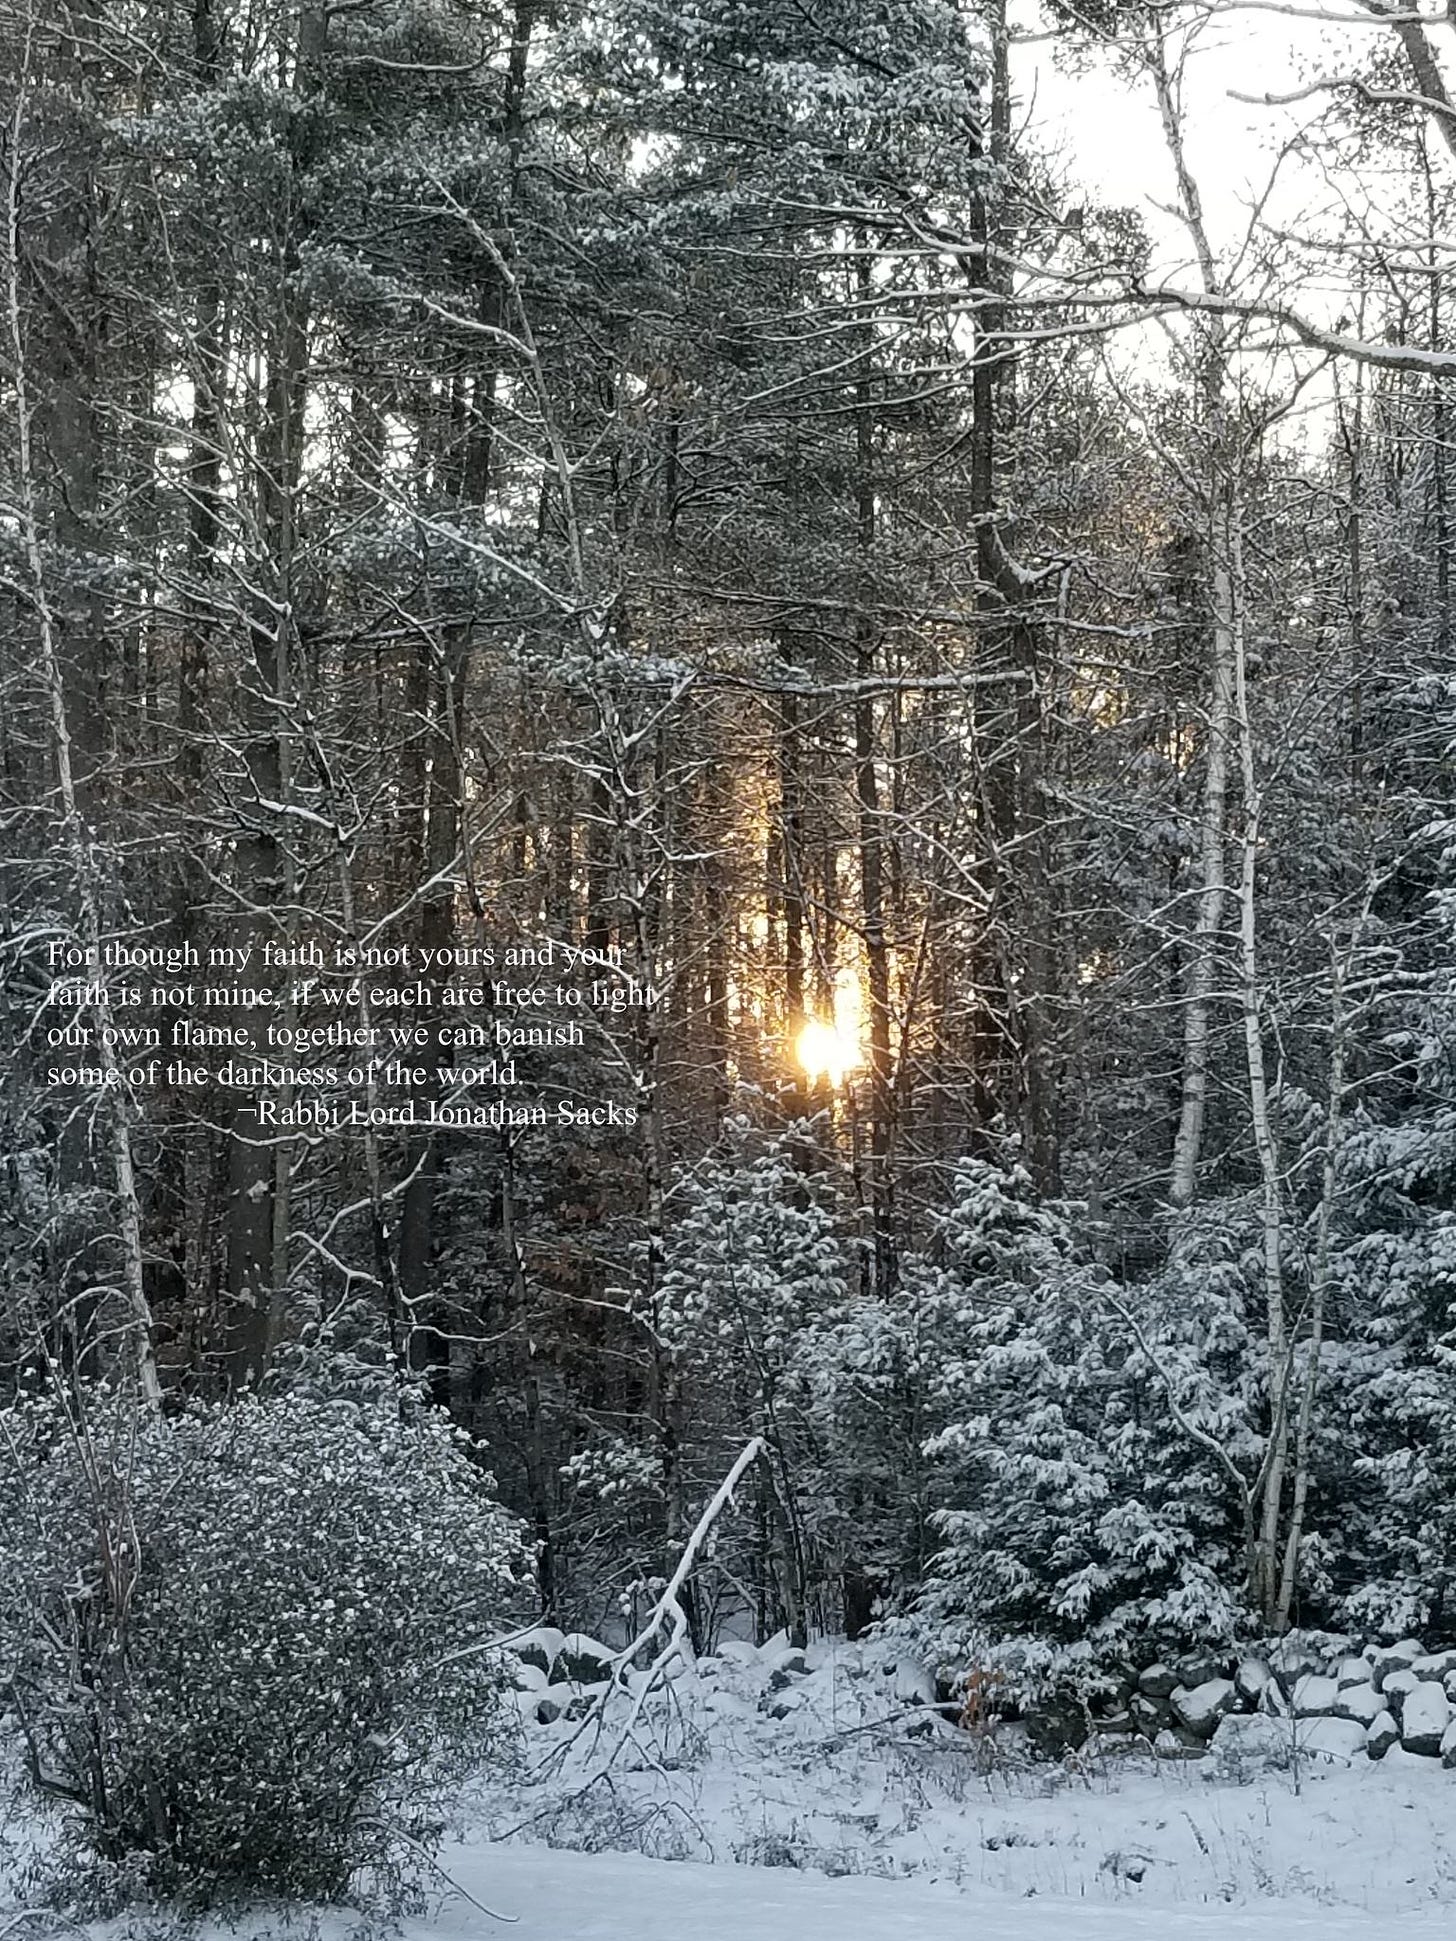 Photo taken by Wendy in her backyard of the sun just rising through snowy trees with Joanathan Saks quote on it.